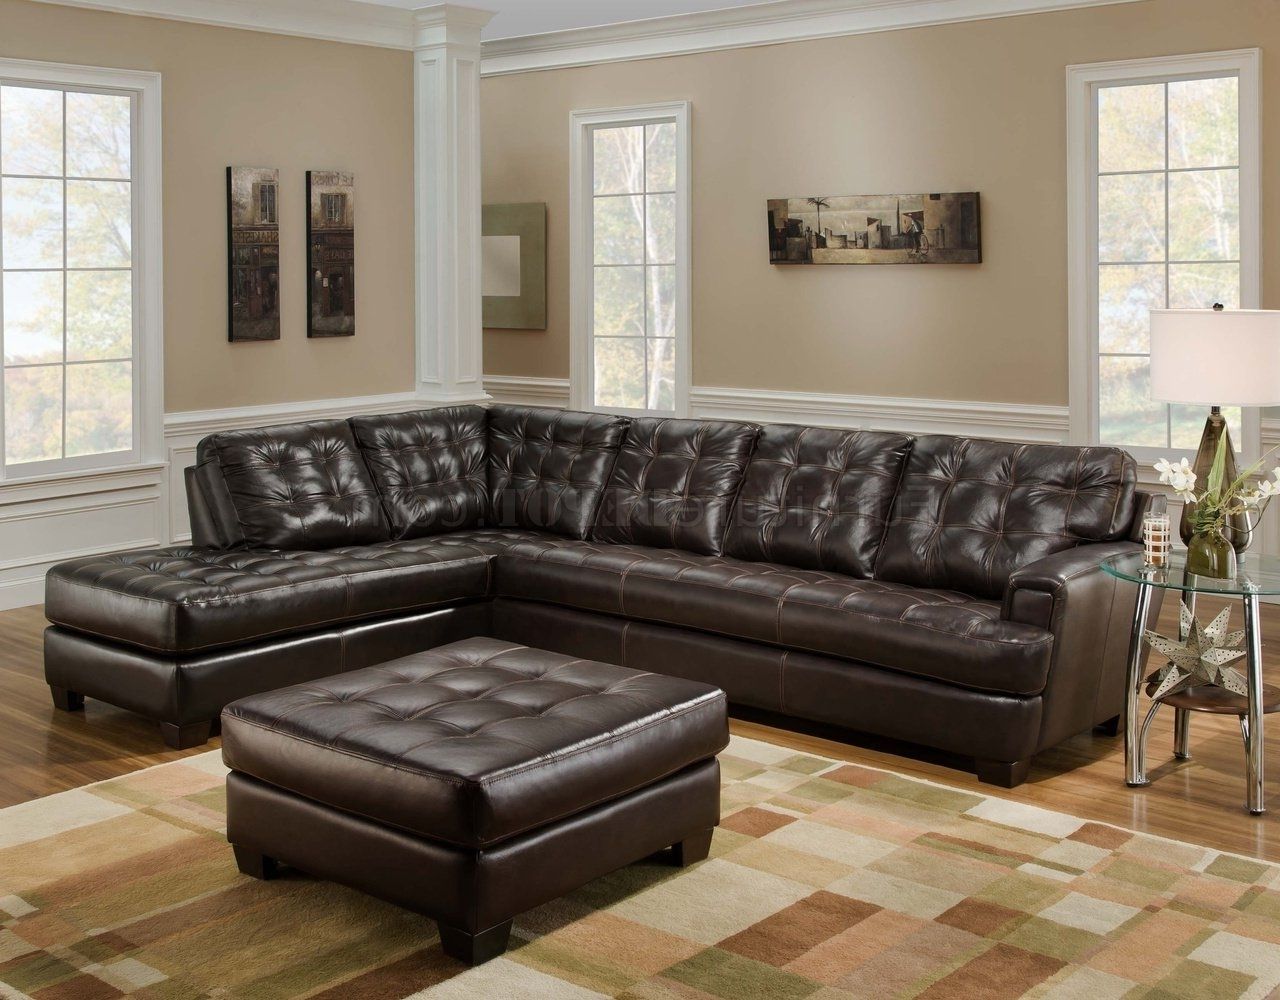 Tufted Sectional Sofas Intended For Well Liked Chicory Brown Tufted Top Grain Leather Modern Sectional Sofa (View 9 of 20)